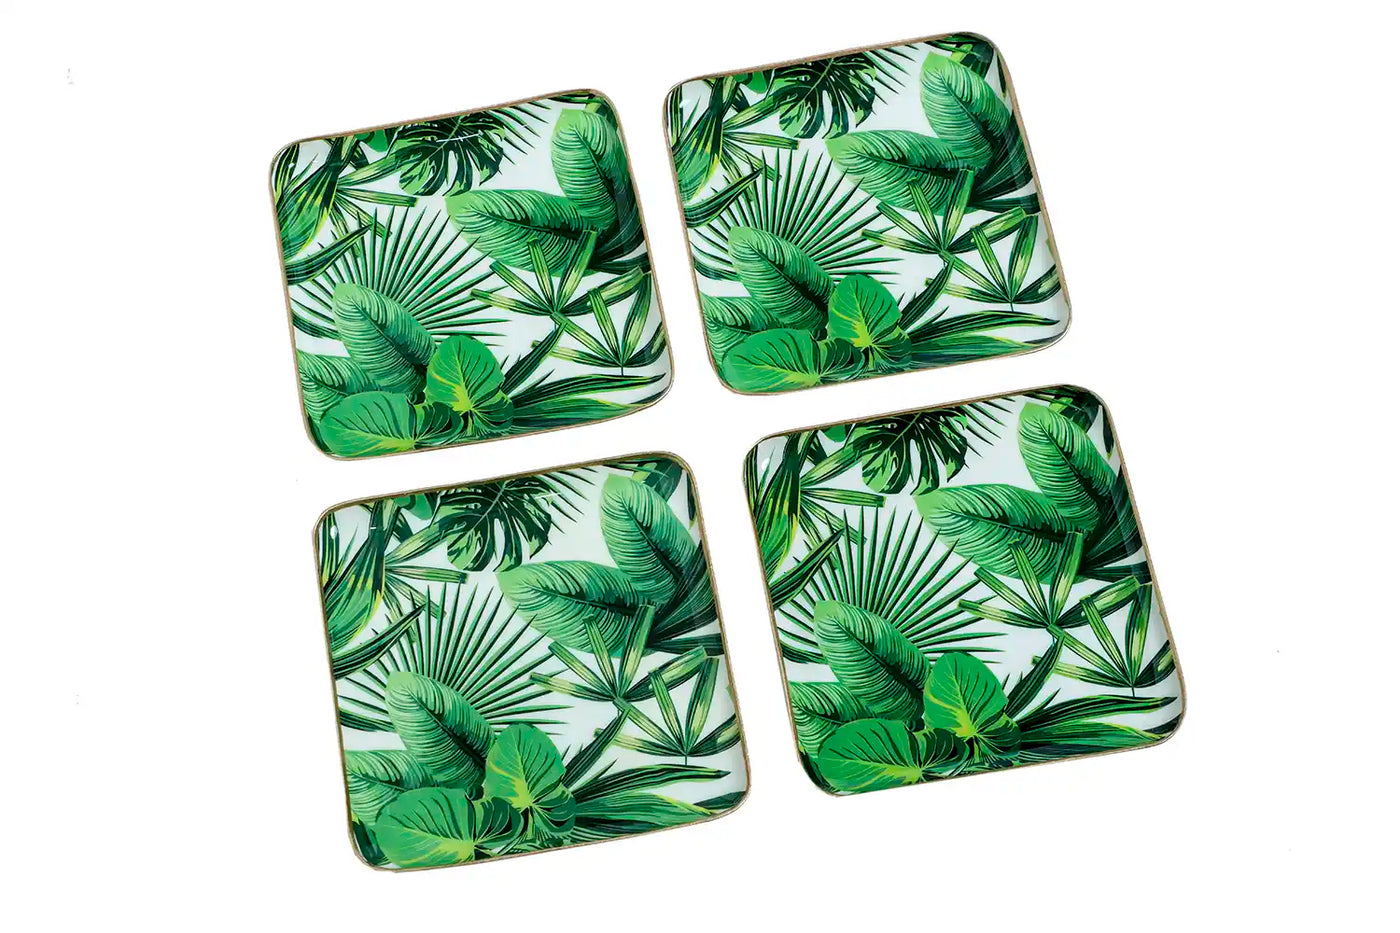 Square Tropical Paradise Palm Leaf Print Metal Plates - Set of 4 - Dining & Kitchen - 3